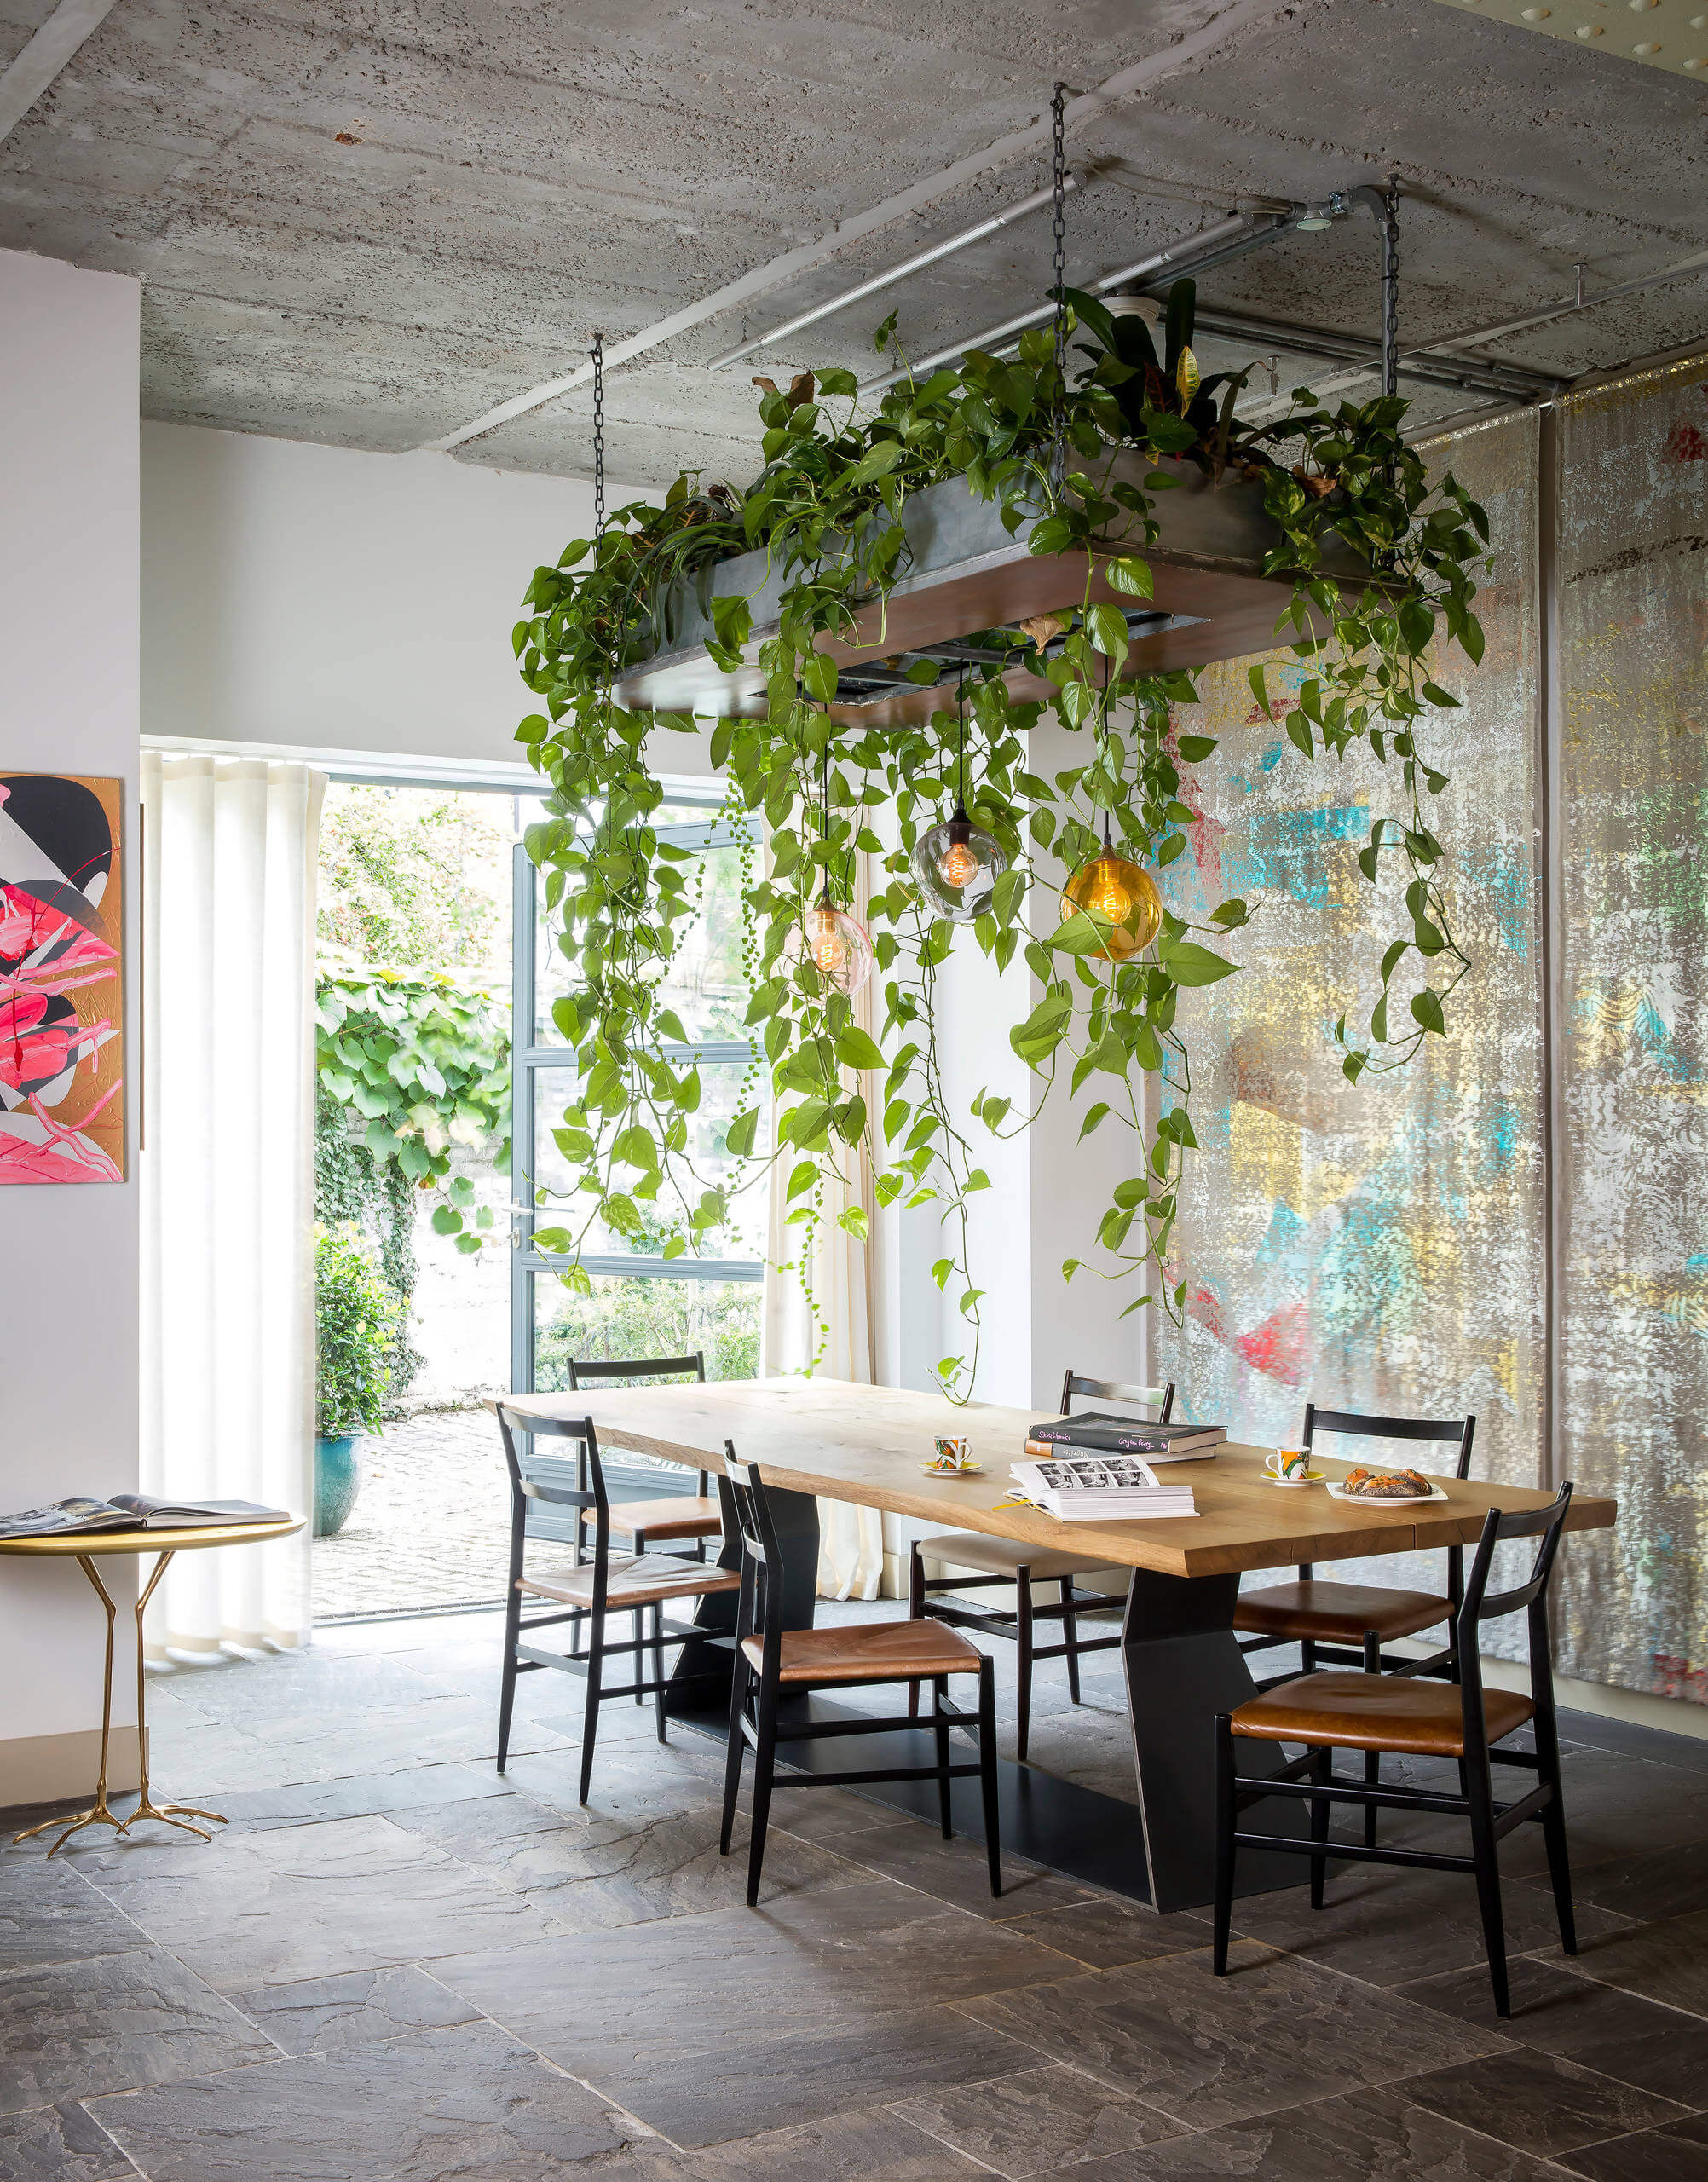 A plant composition suspended above the dining table 